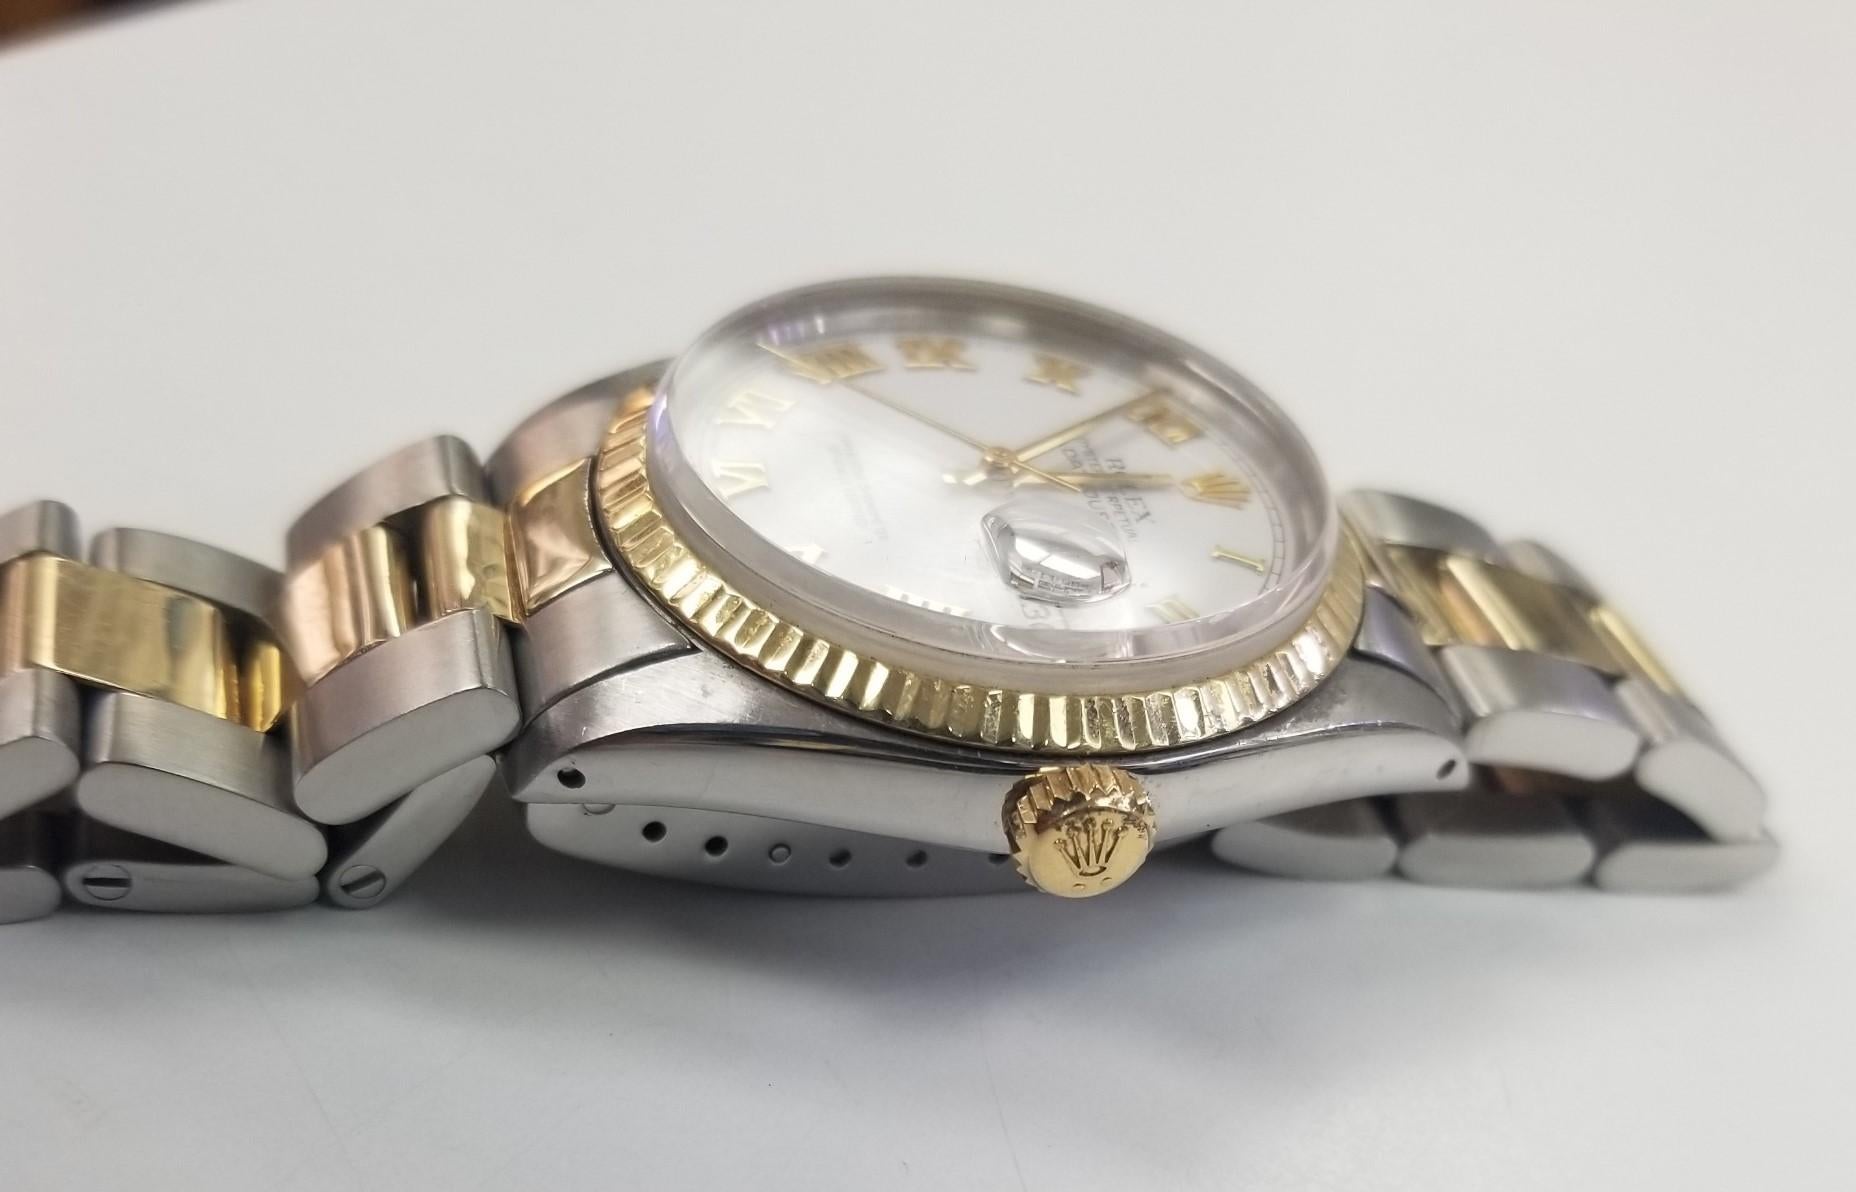 Rolex Date 34mm White White Dial Roman Numeral
Accent Dial 2 Tone Oyster Band 
Creator: Rolex
Design: Datejust Watch Datejust Collection
Case Material: 18k Gold and Stainless Steel
Strap Material: 18k Gold and Stainless Steel
Serial number: